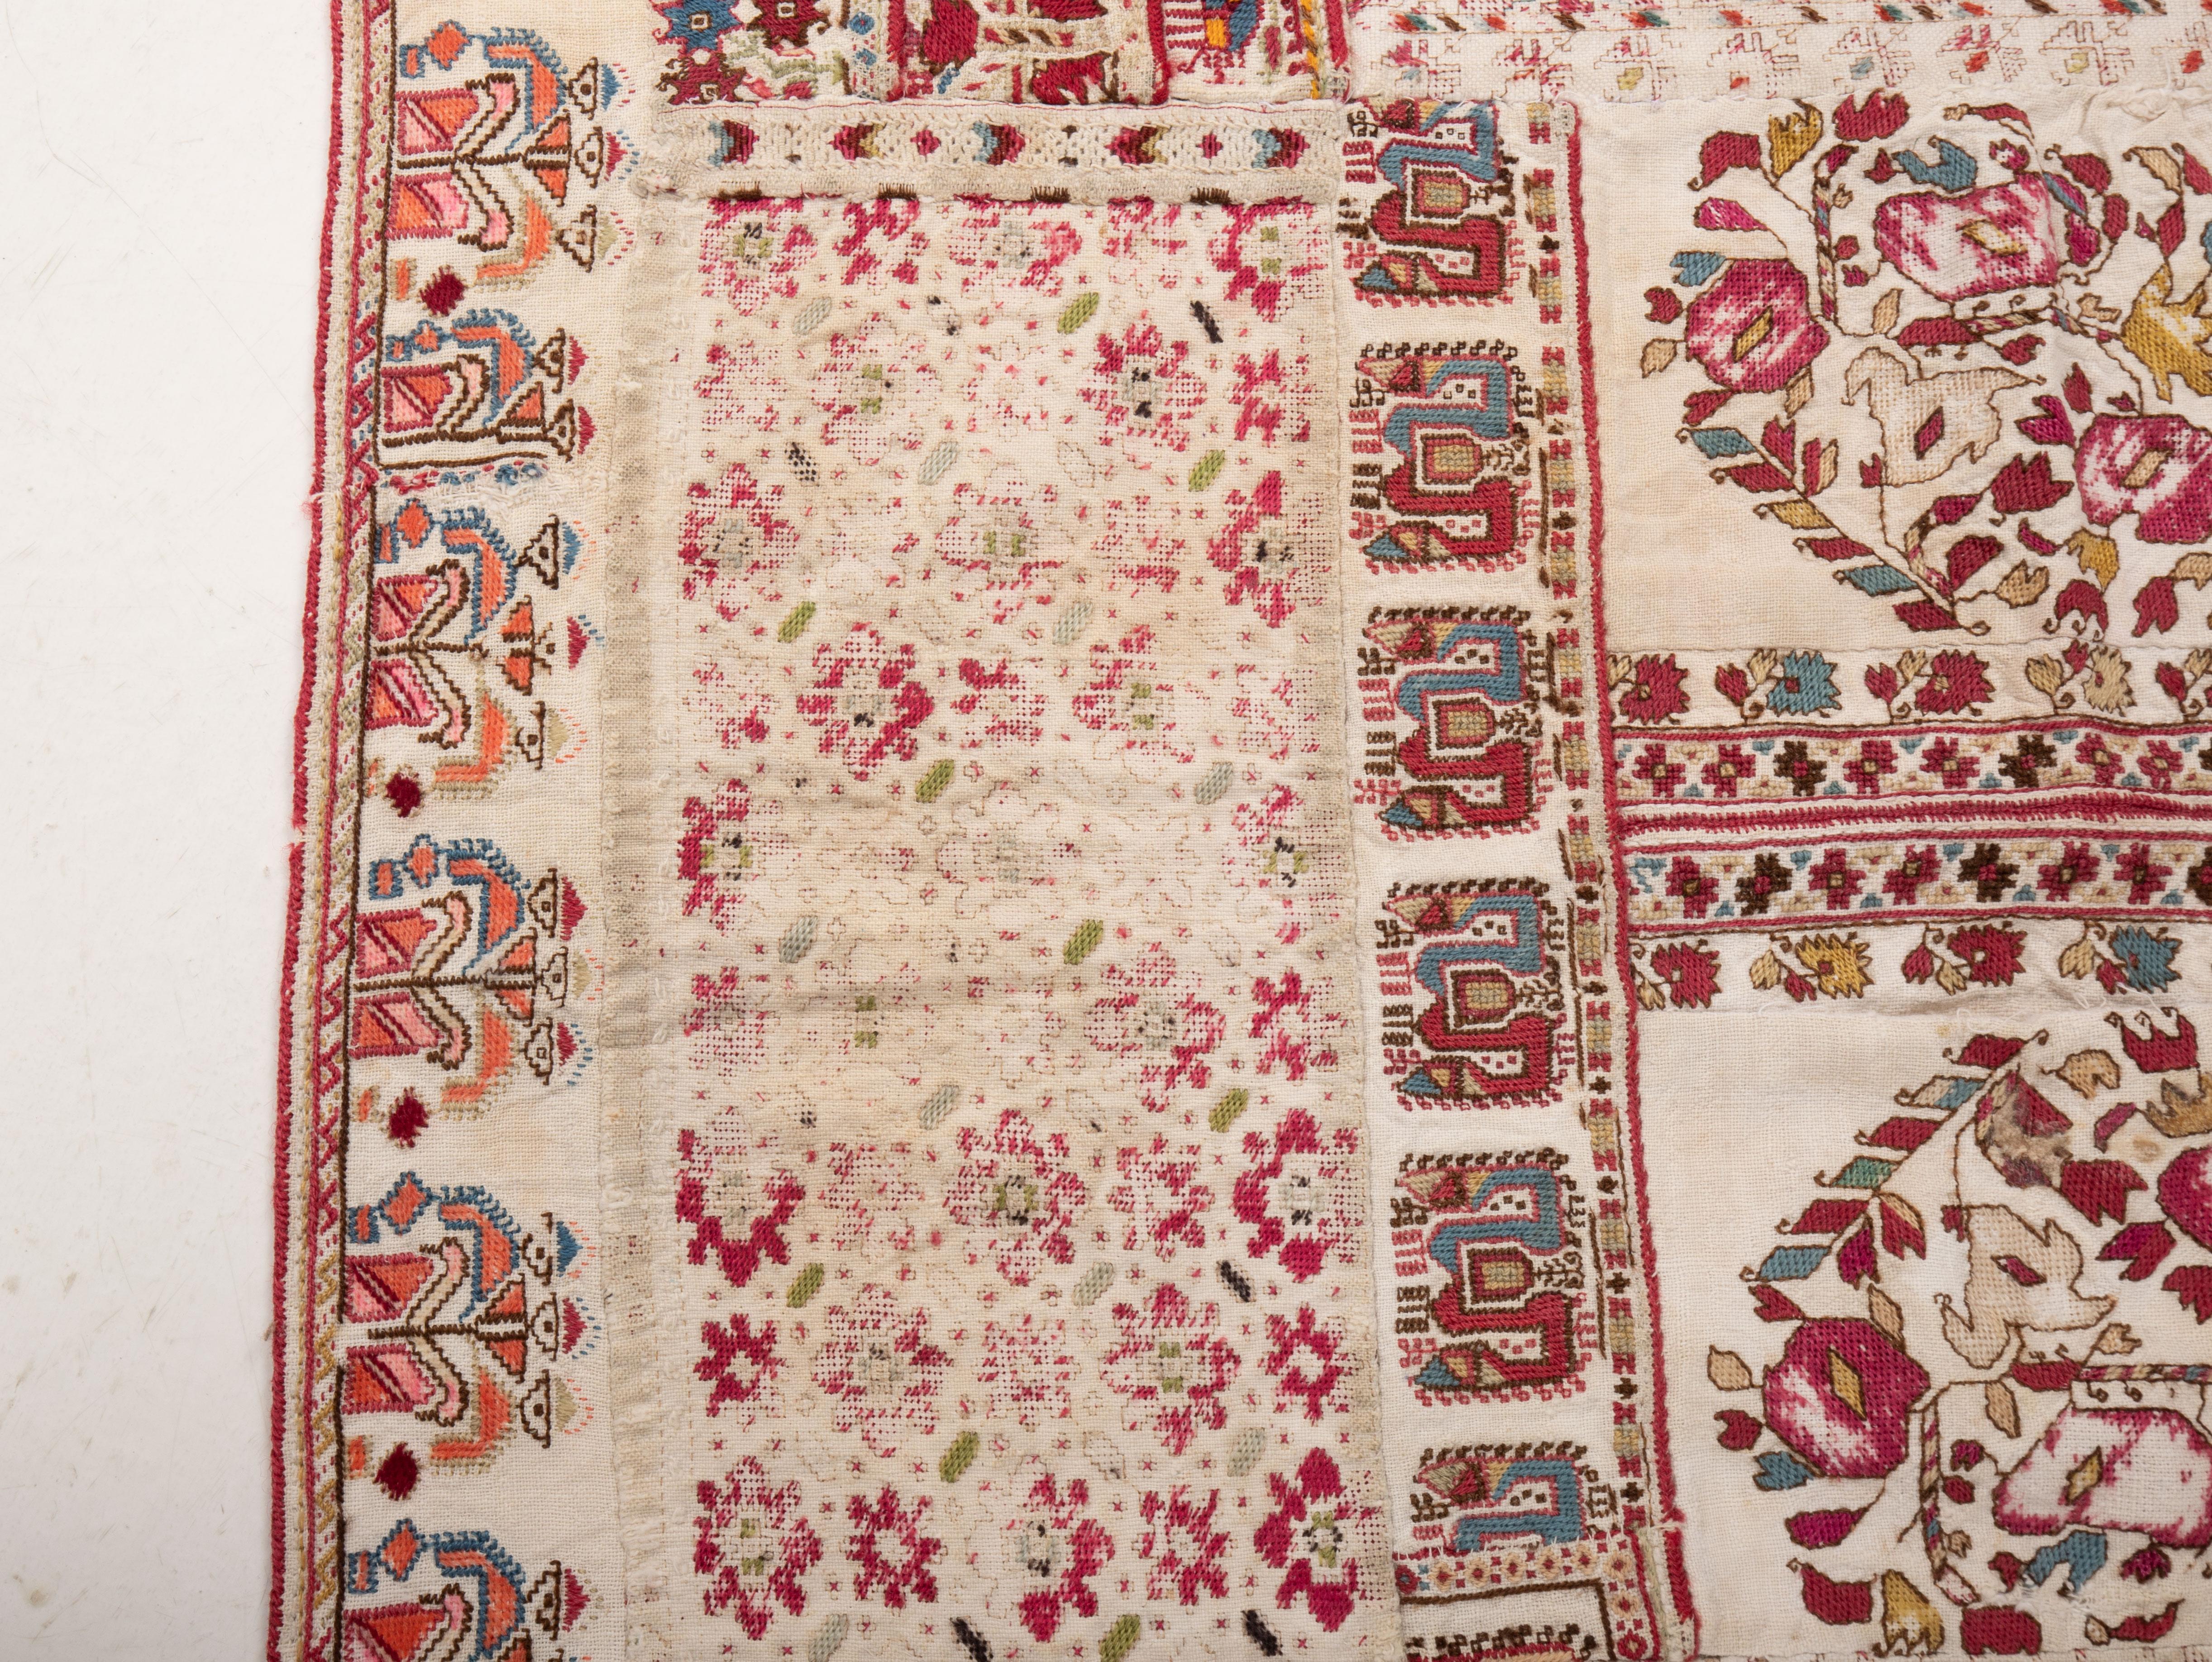 Cotton Early 20th C. Macedonian Embroidered Composite Squarish Panel